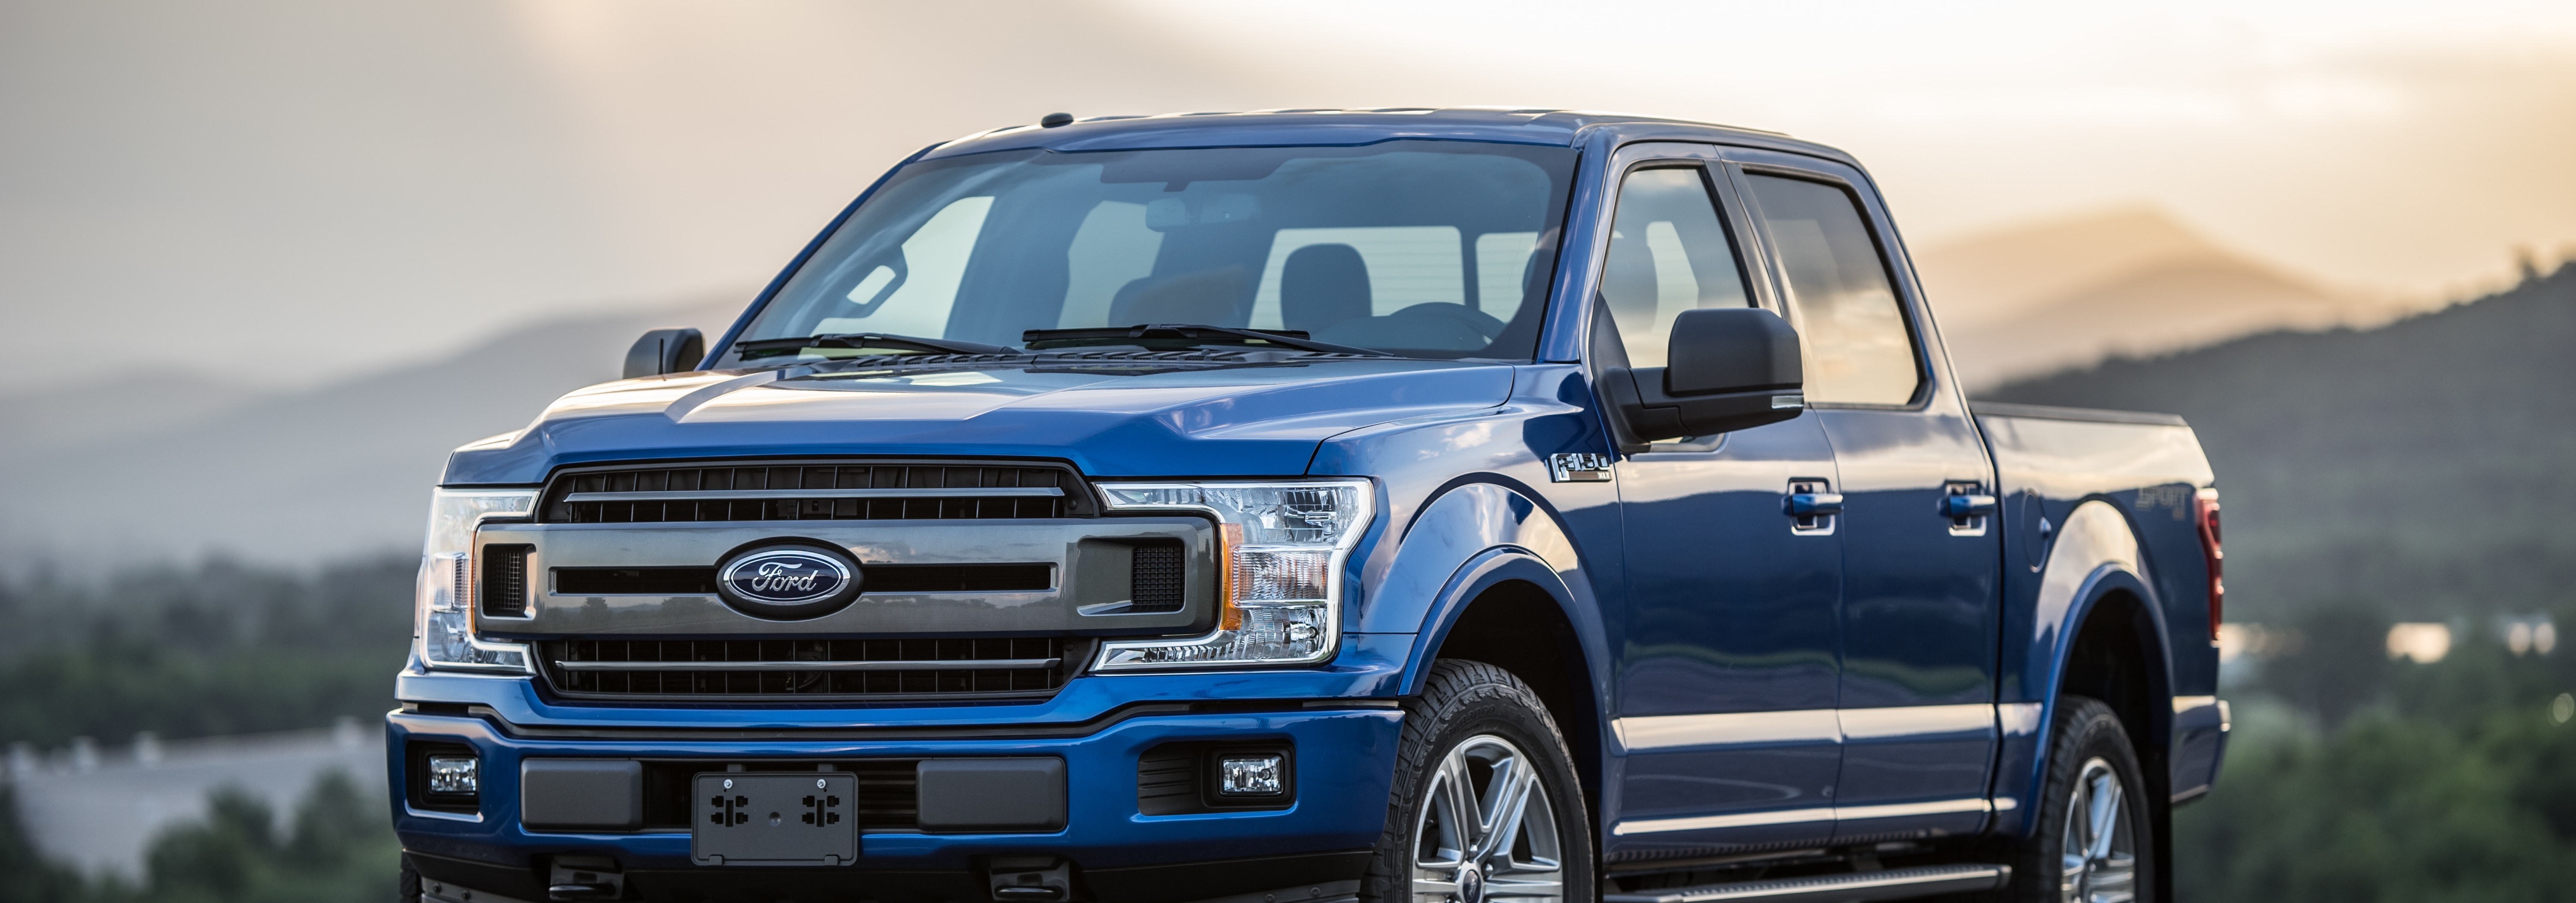 Troubleshooting Ford Pickups